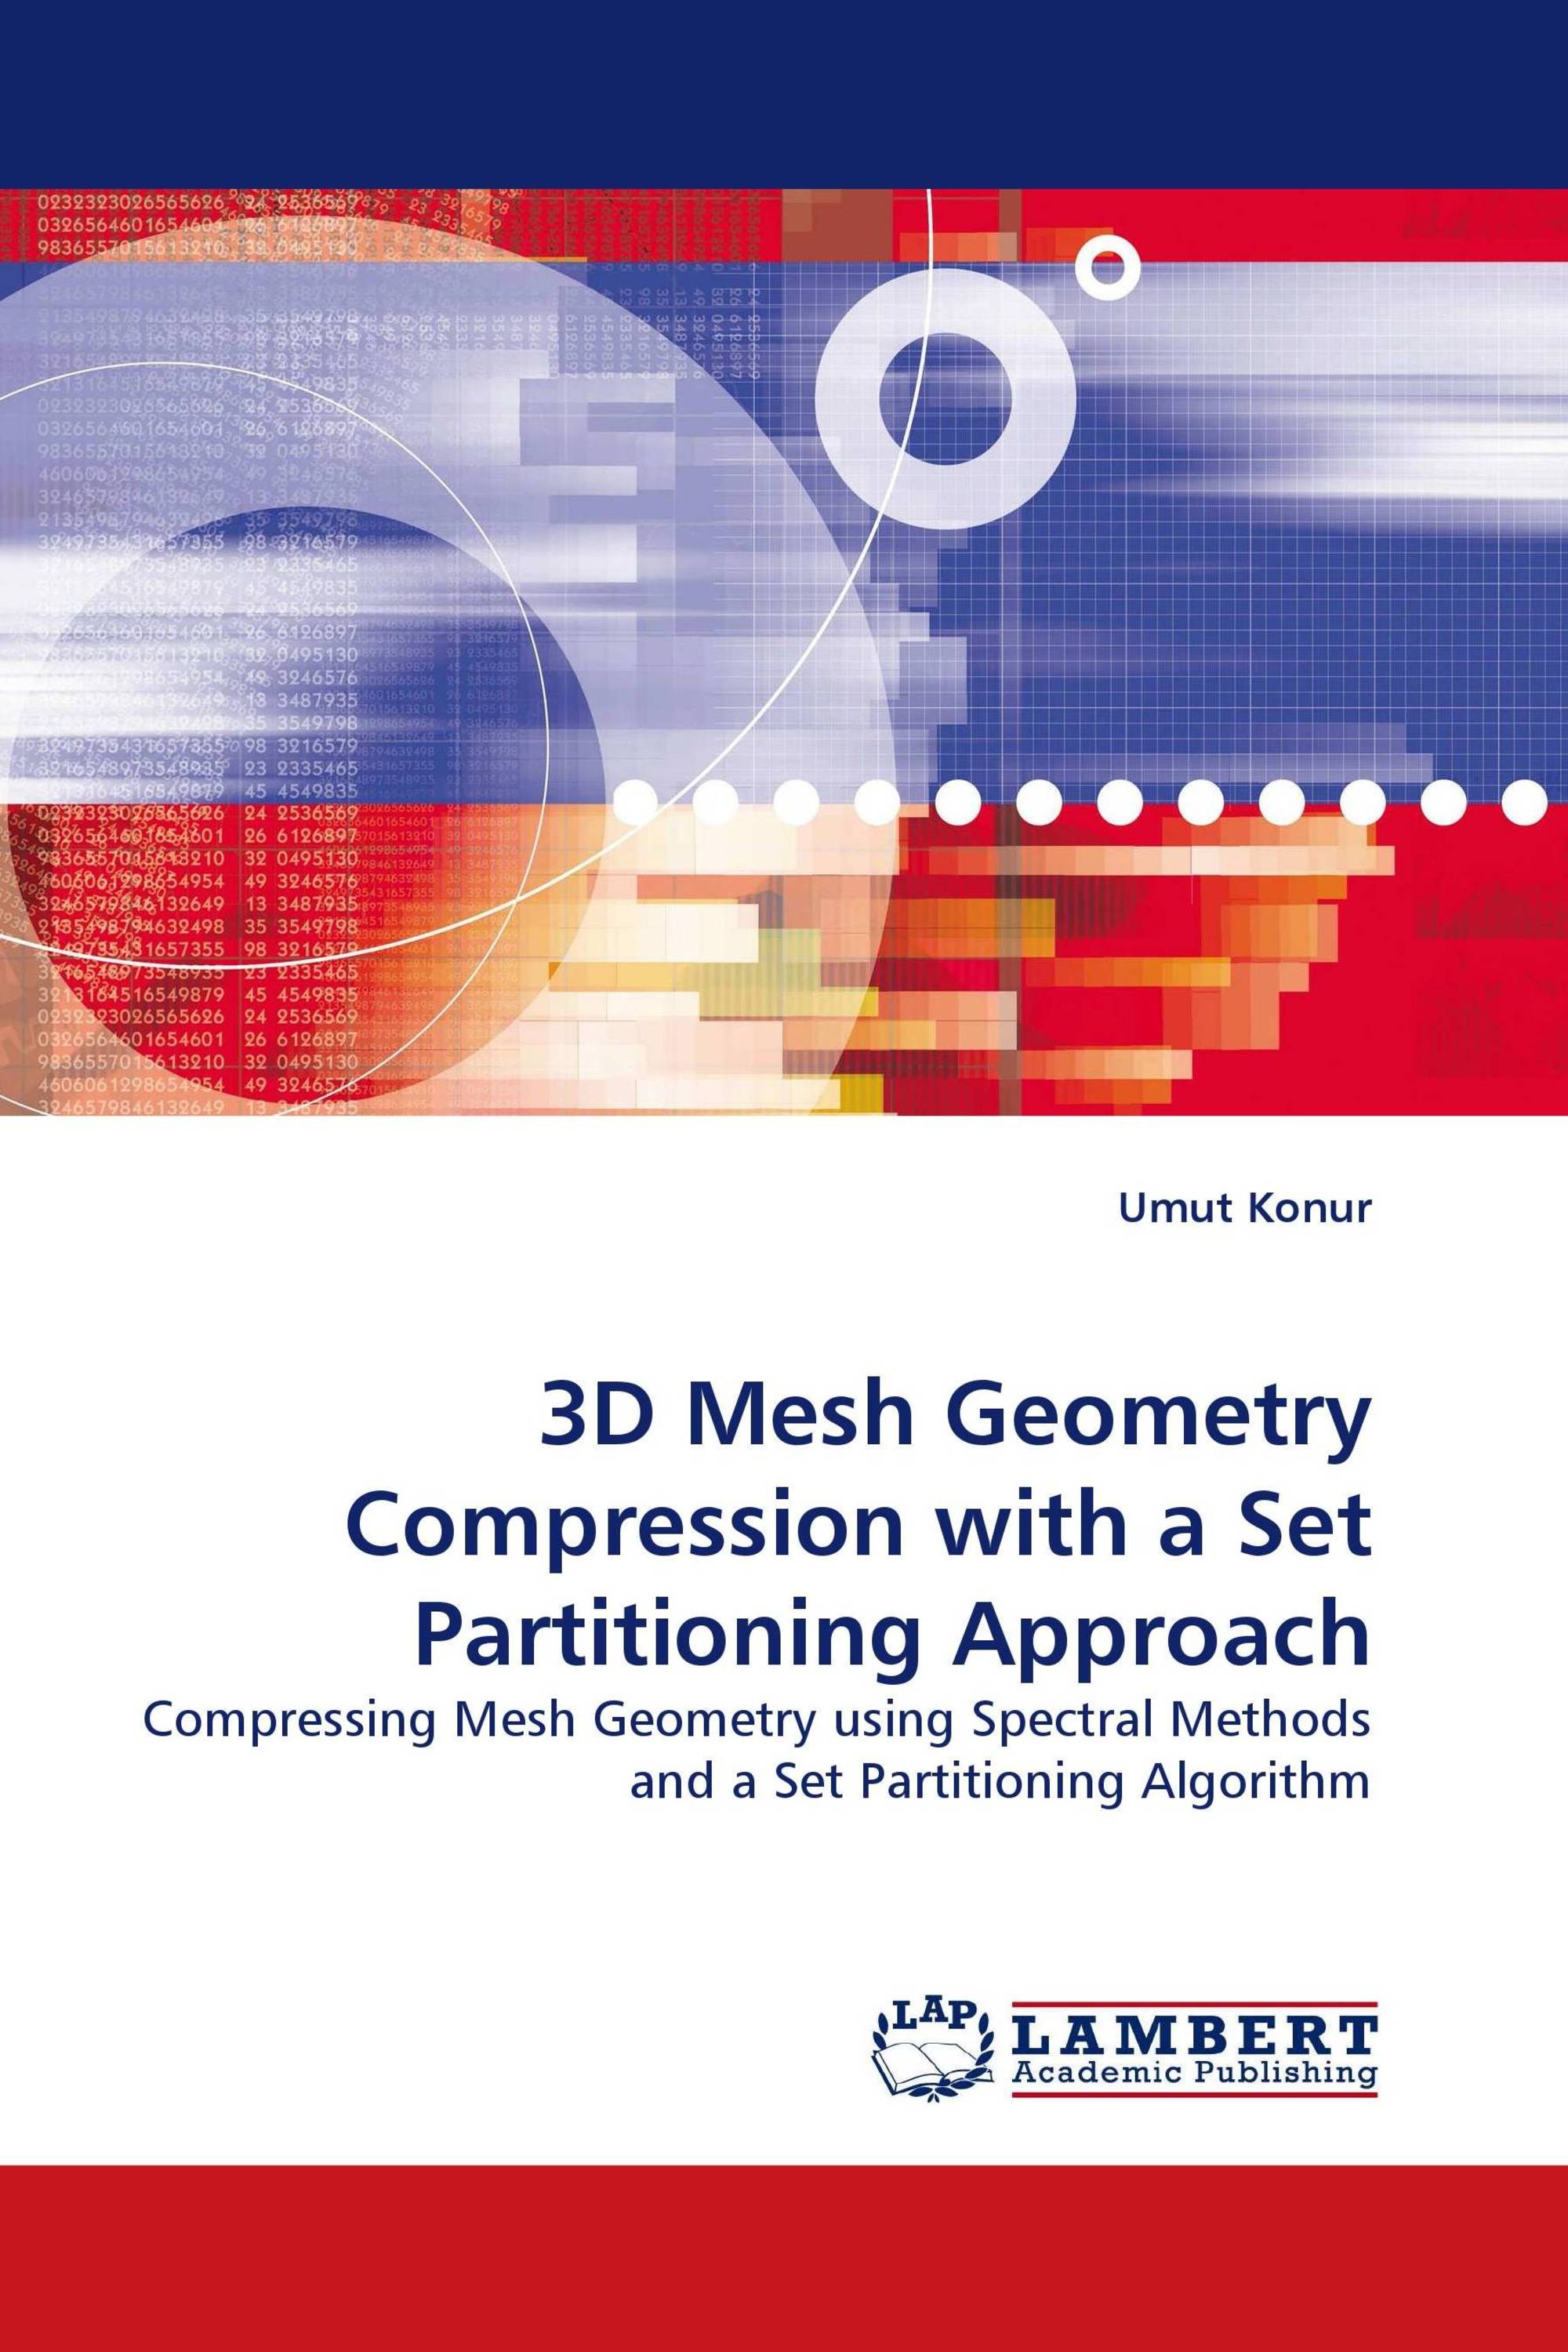 3D Mesh Geometry Compression with a Set Partitioning Approach